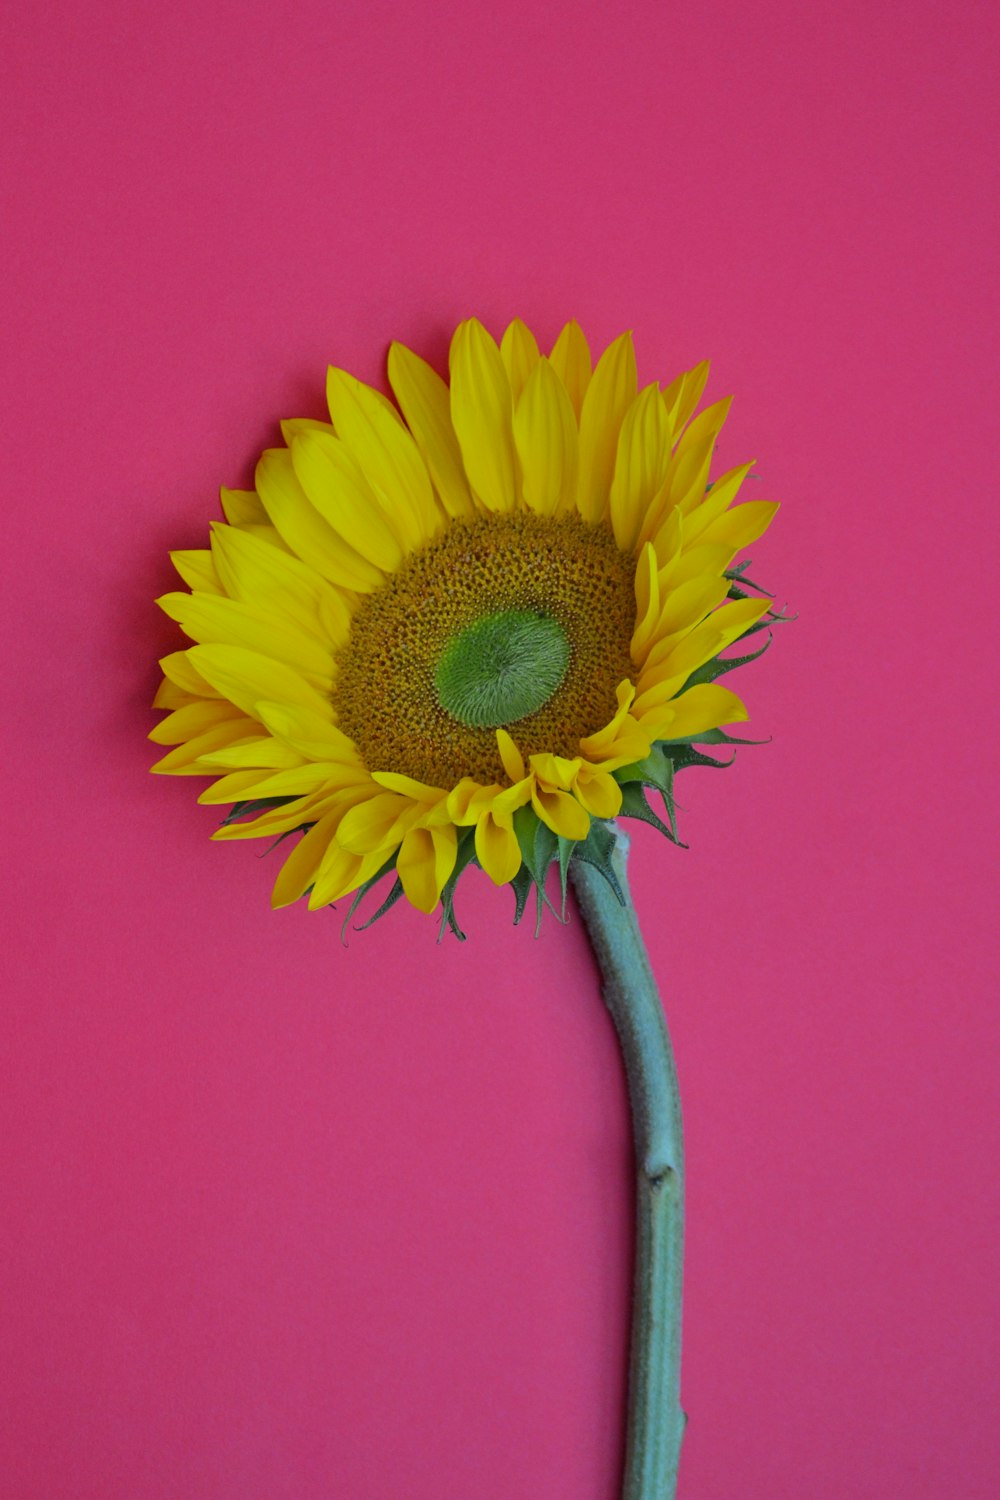 yellow sunflower in pink background